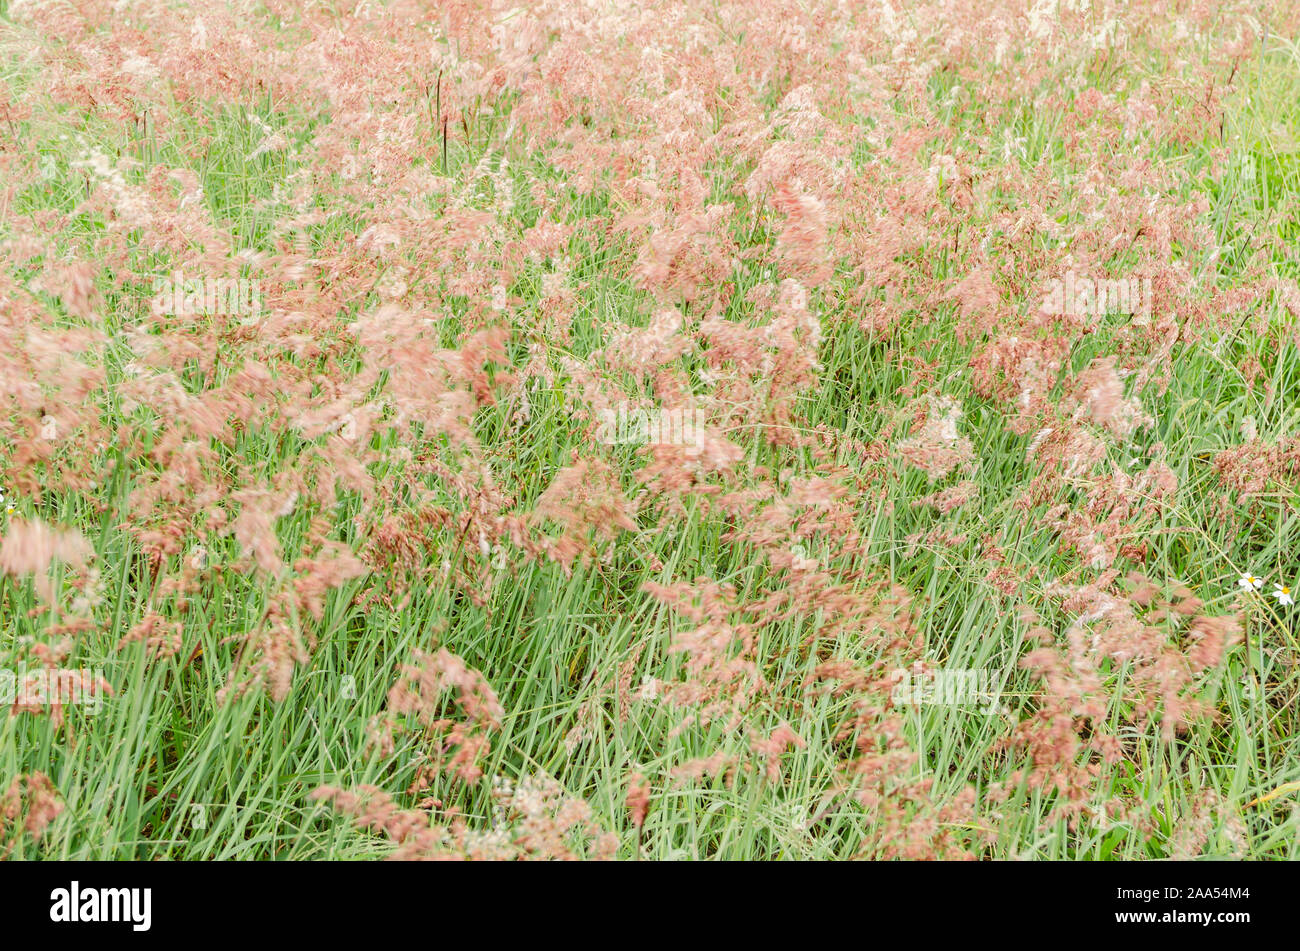 Blooming Grass Texture Stock Photo